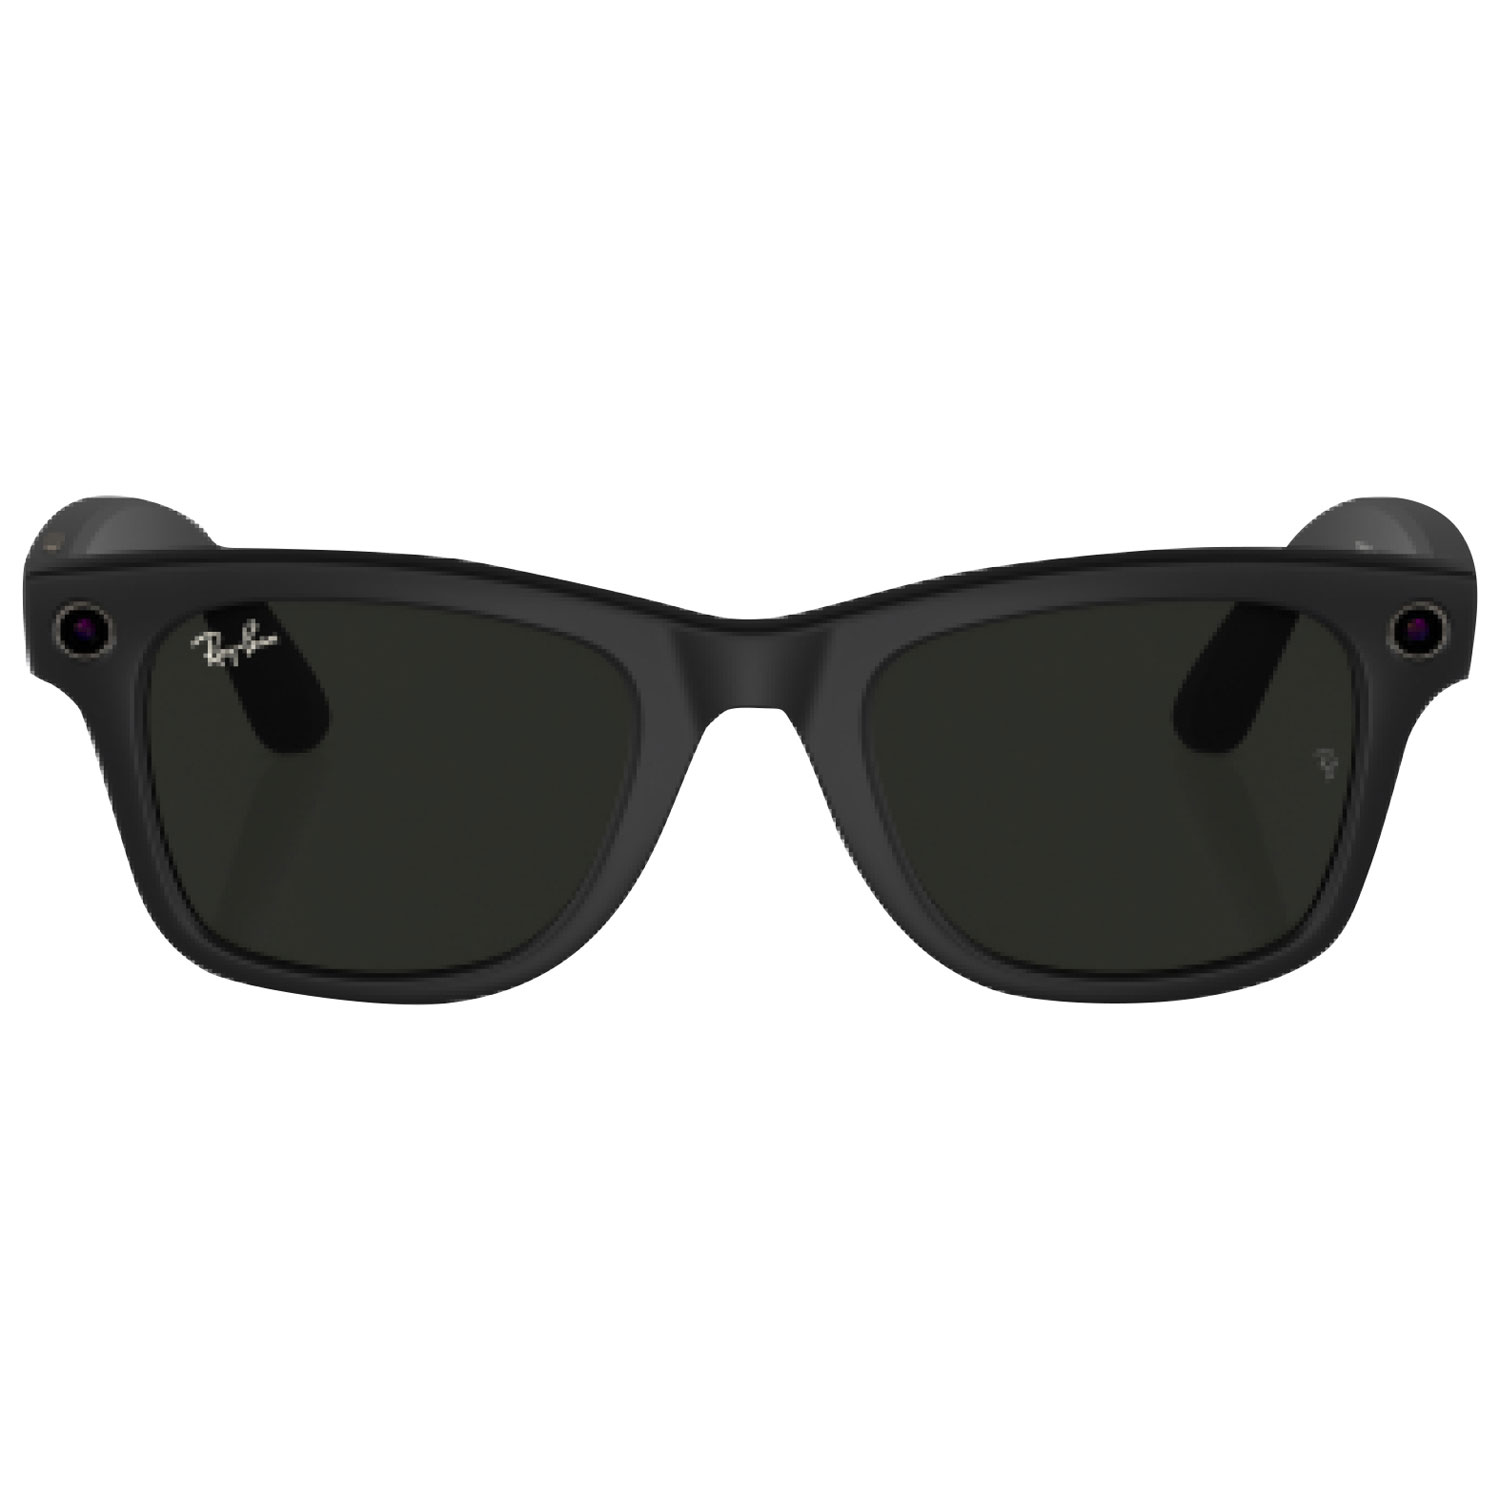 Ray-Ban | Meta Wayfarer Smart Glasses with Photo, Video & Audio - Matte Black/Clear to G-15 Green Transitions